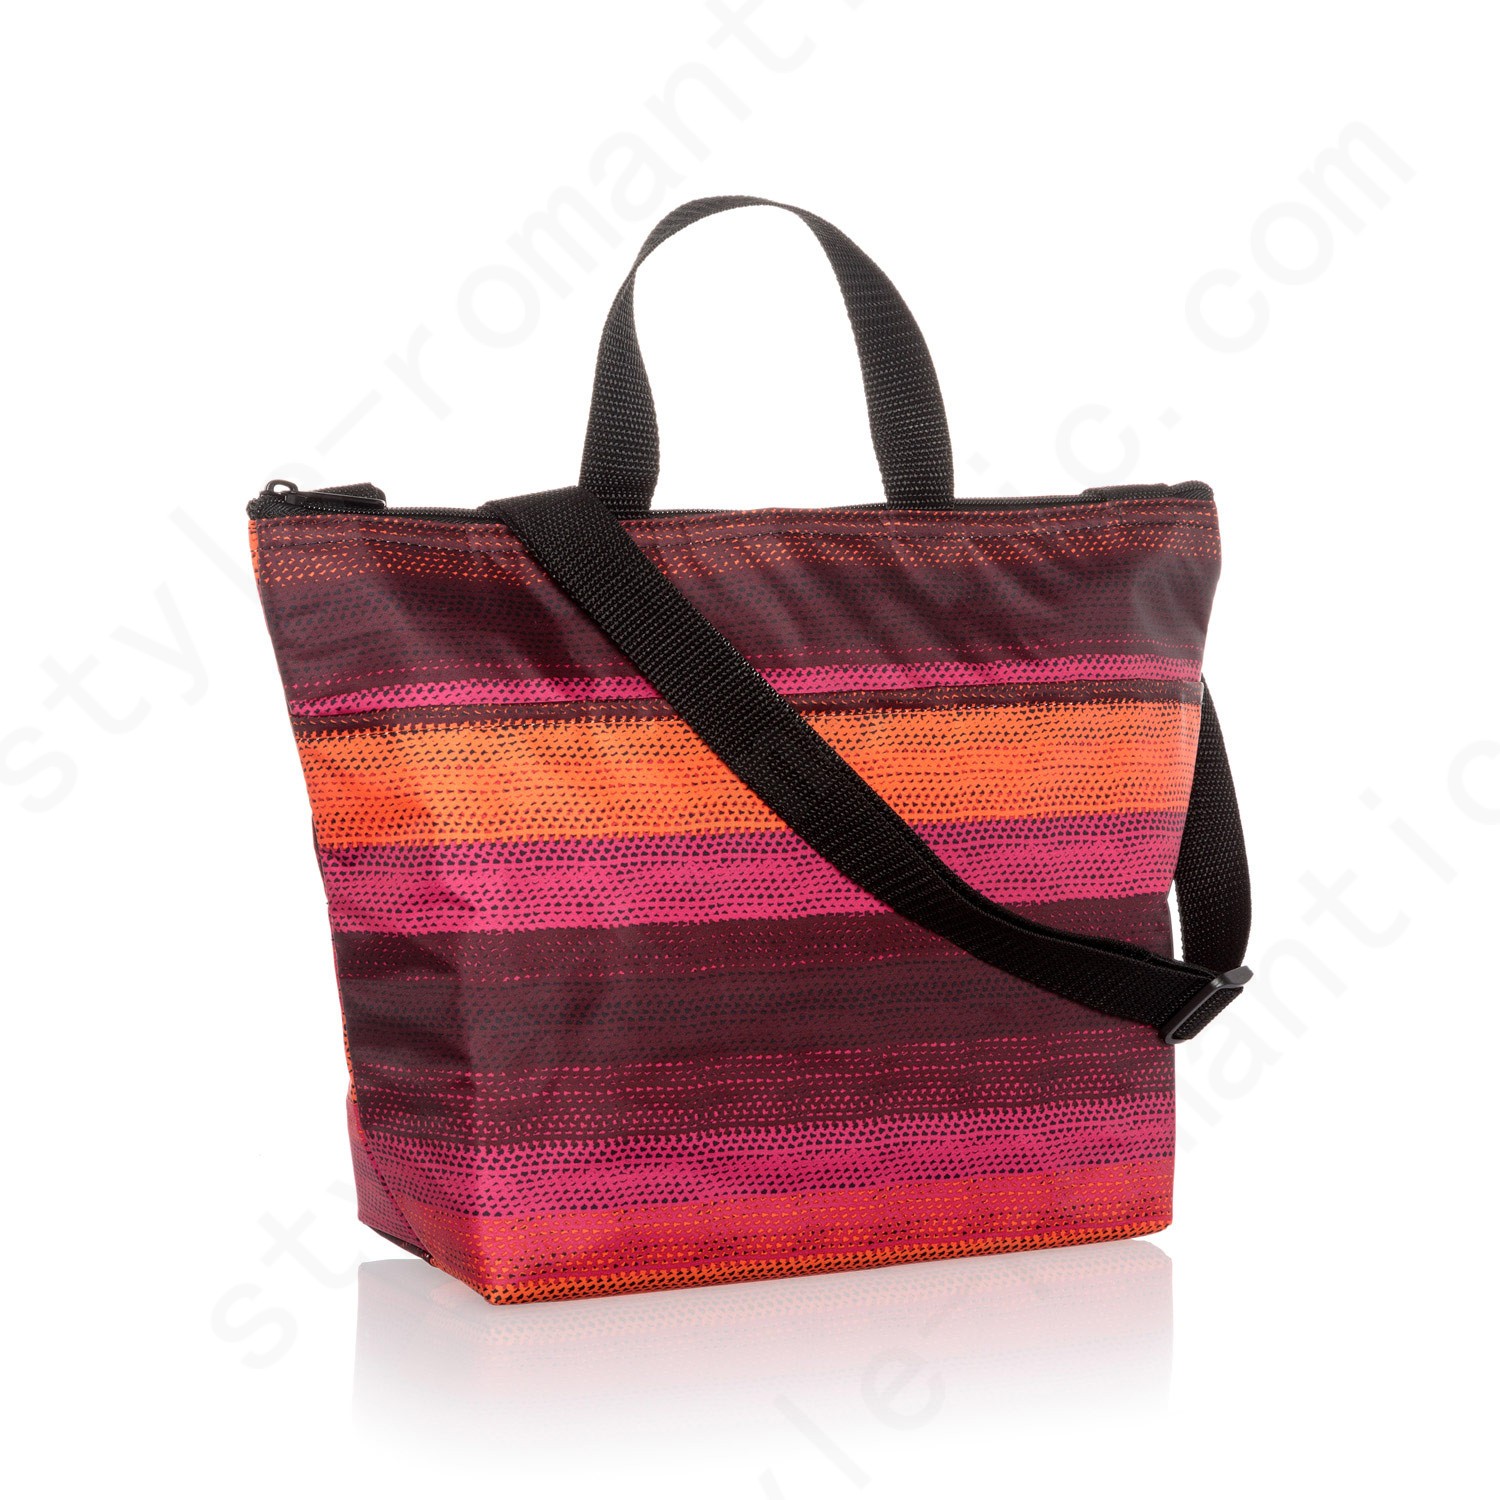 Thirty-One Gifts Crossbody Thermal Tote - Ombre Stripe Bags Accessories - Thirty-One Gifts Crossbody Thermal Tote - Ombre Stripe Bags Accessories